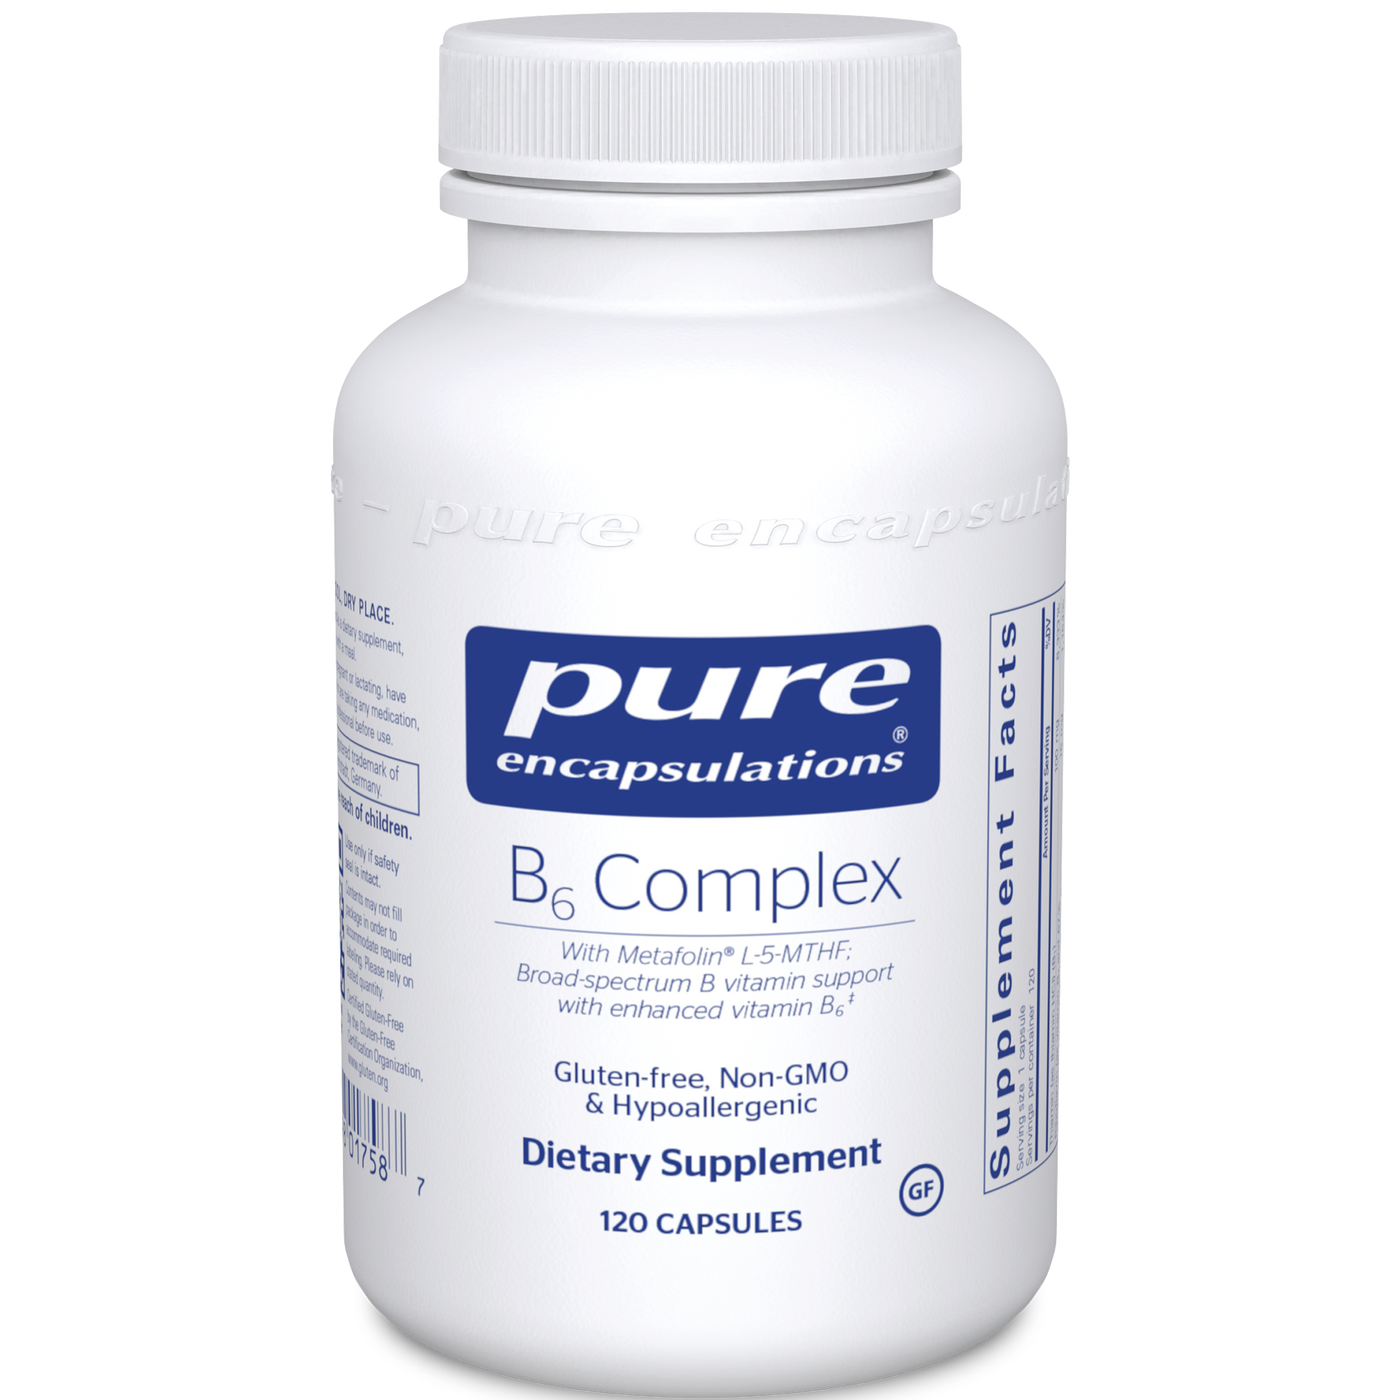 B6 Complex 120 vcaps Curated Wellness